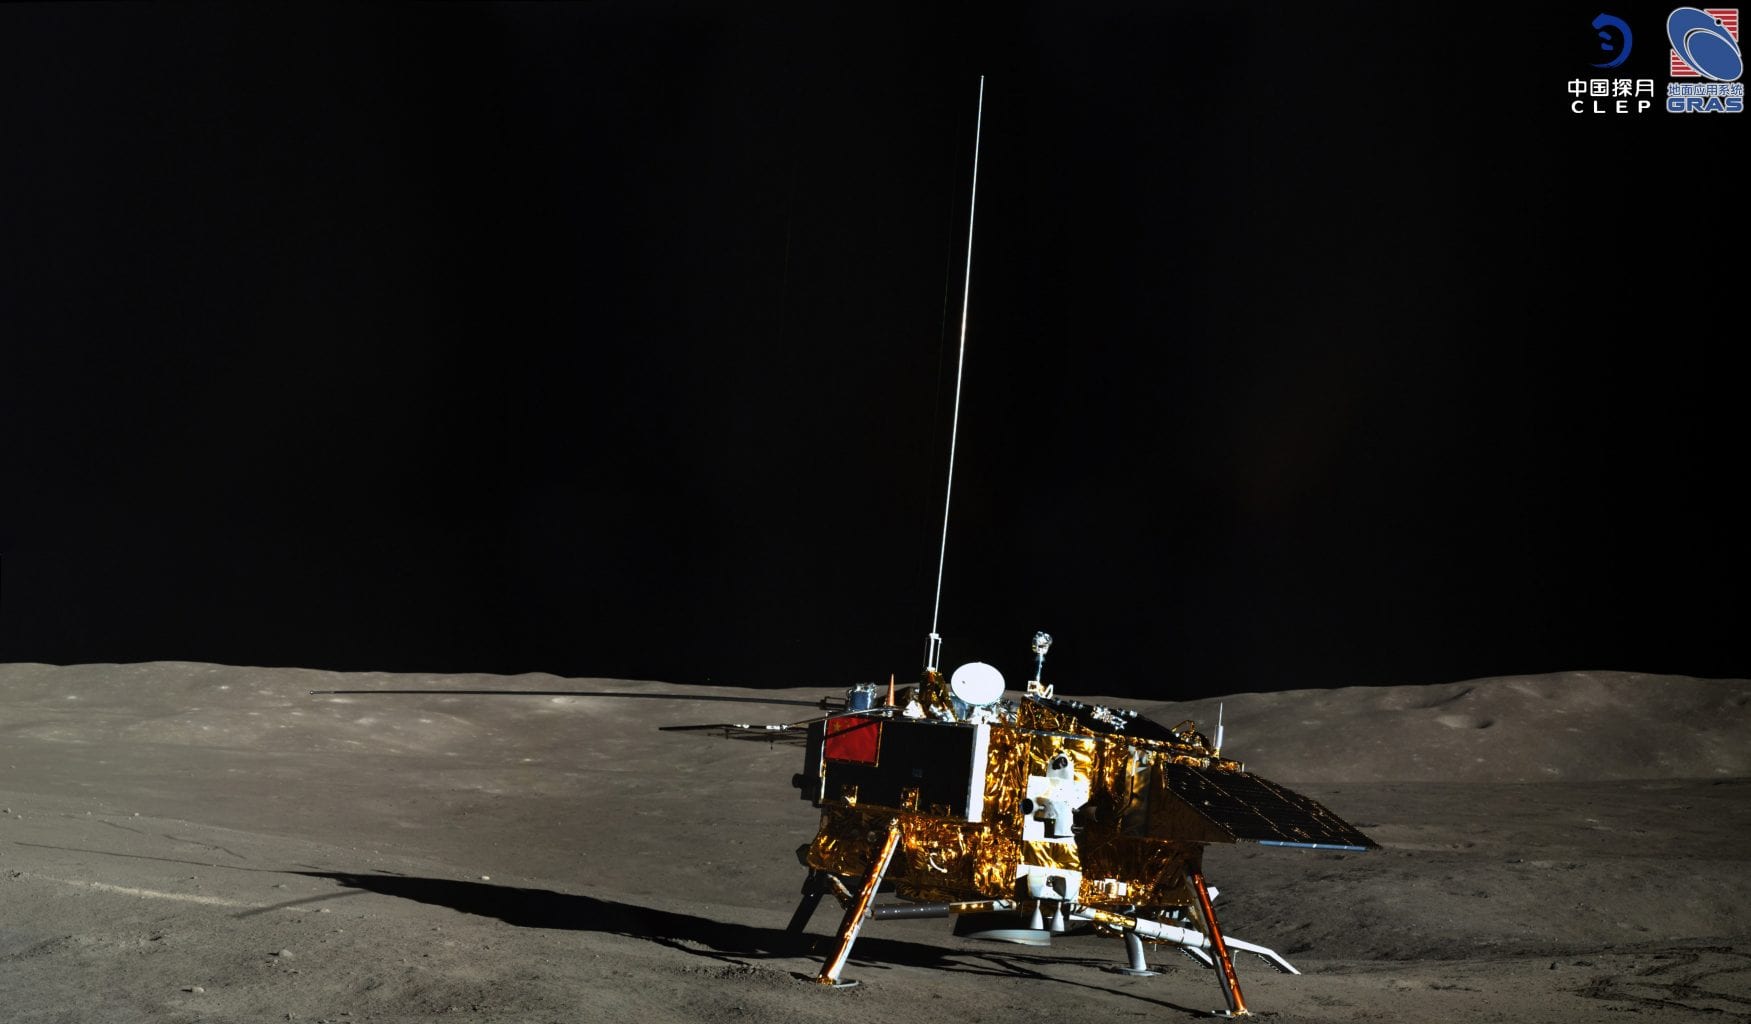 Image from Yutu-2 of the lander. Credit: CLEP/ Lunar and Planetary Multimedia Database